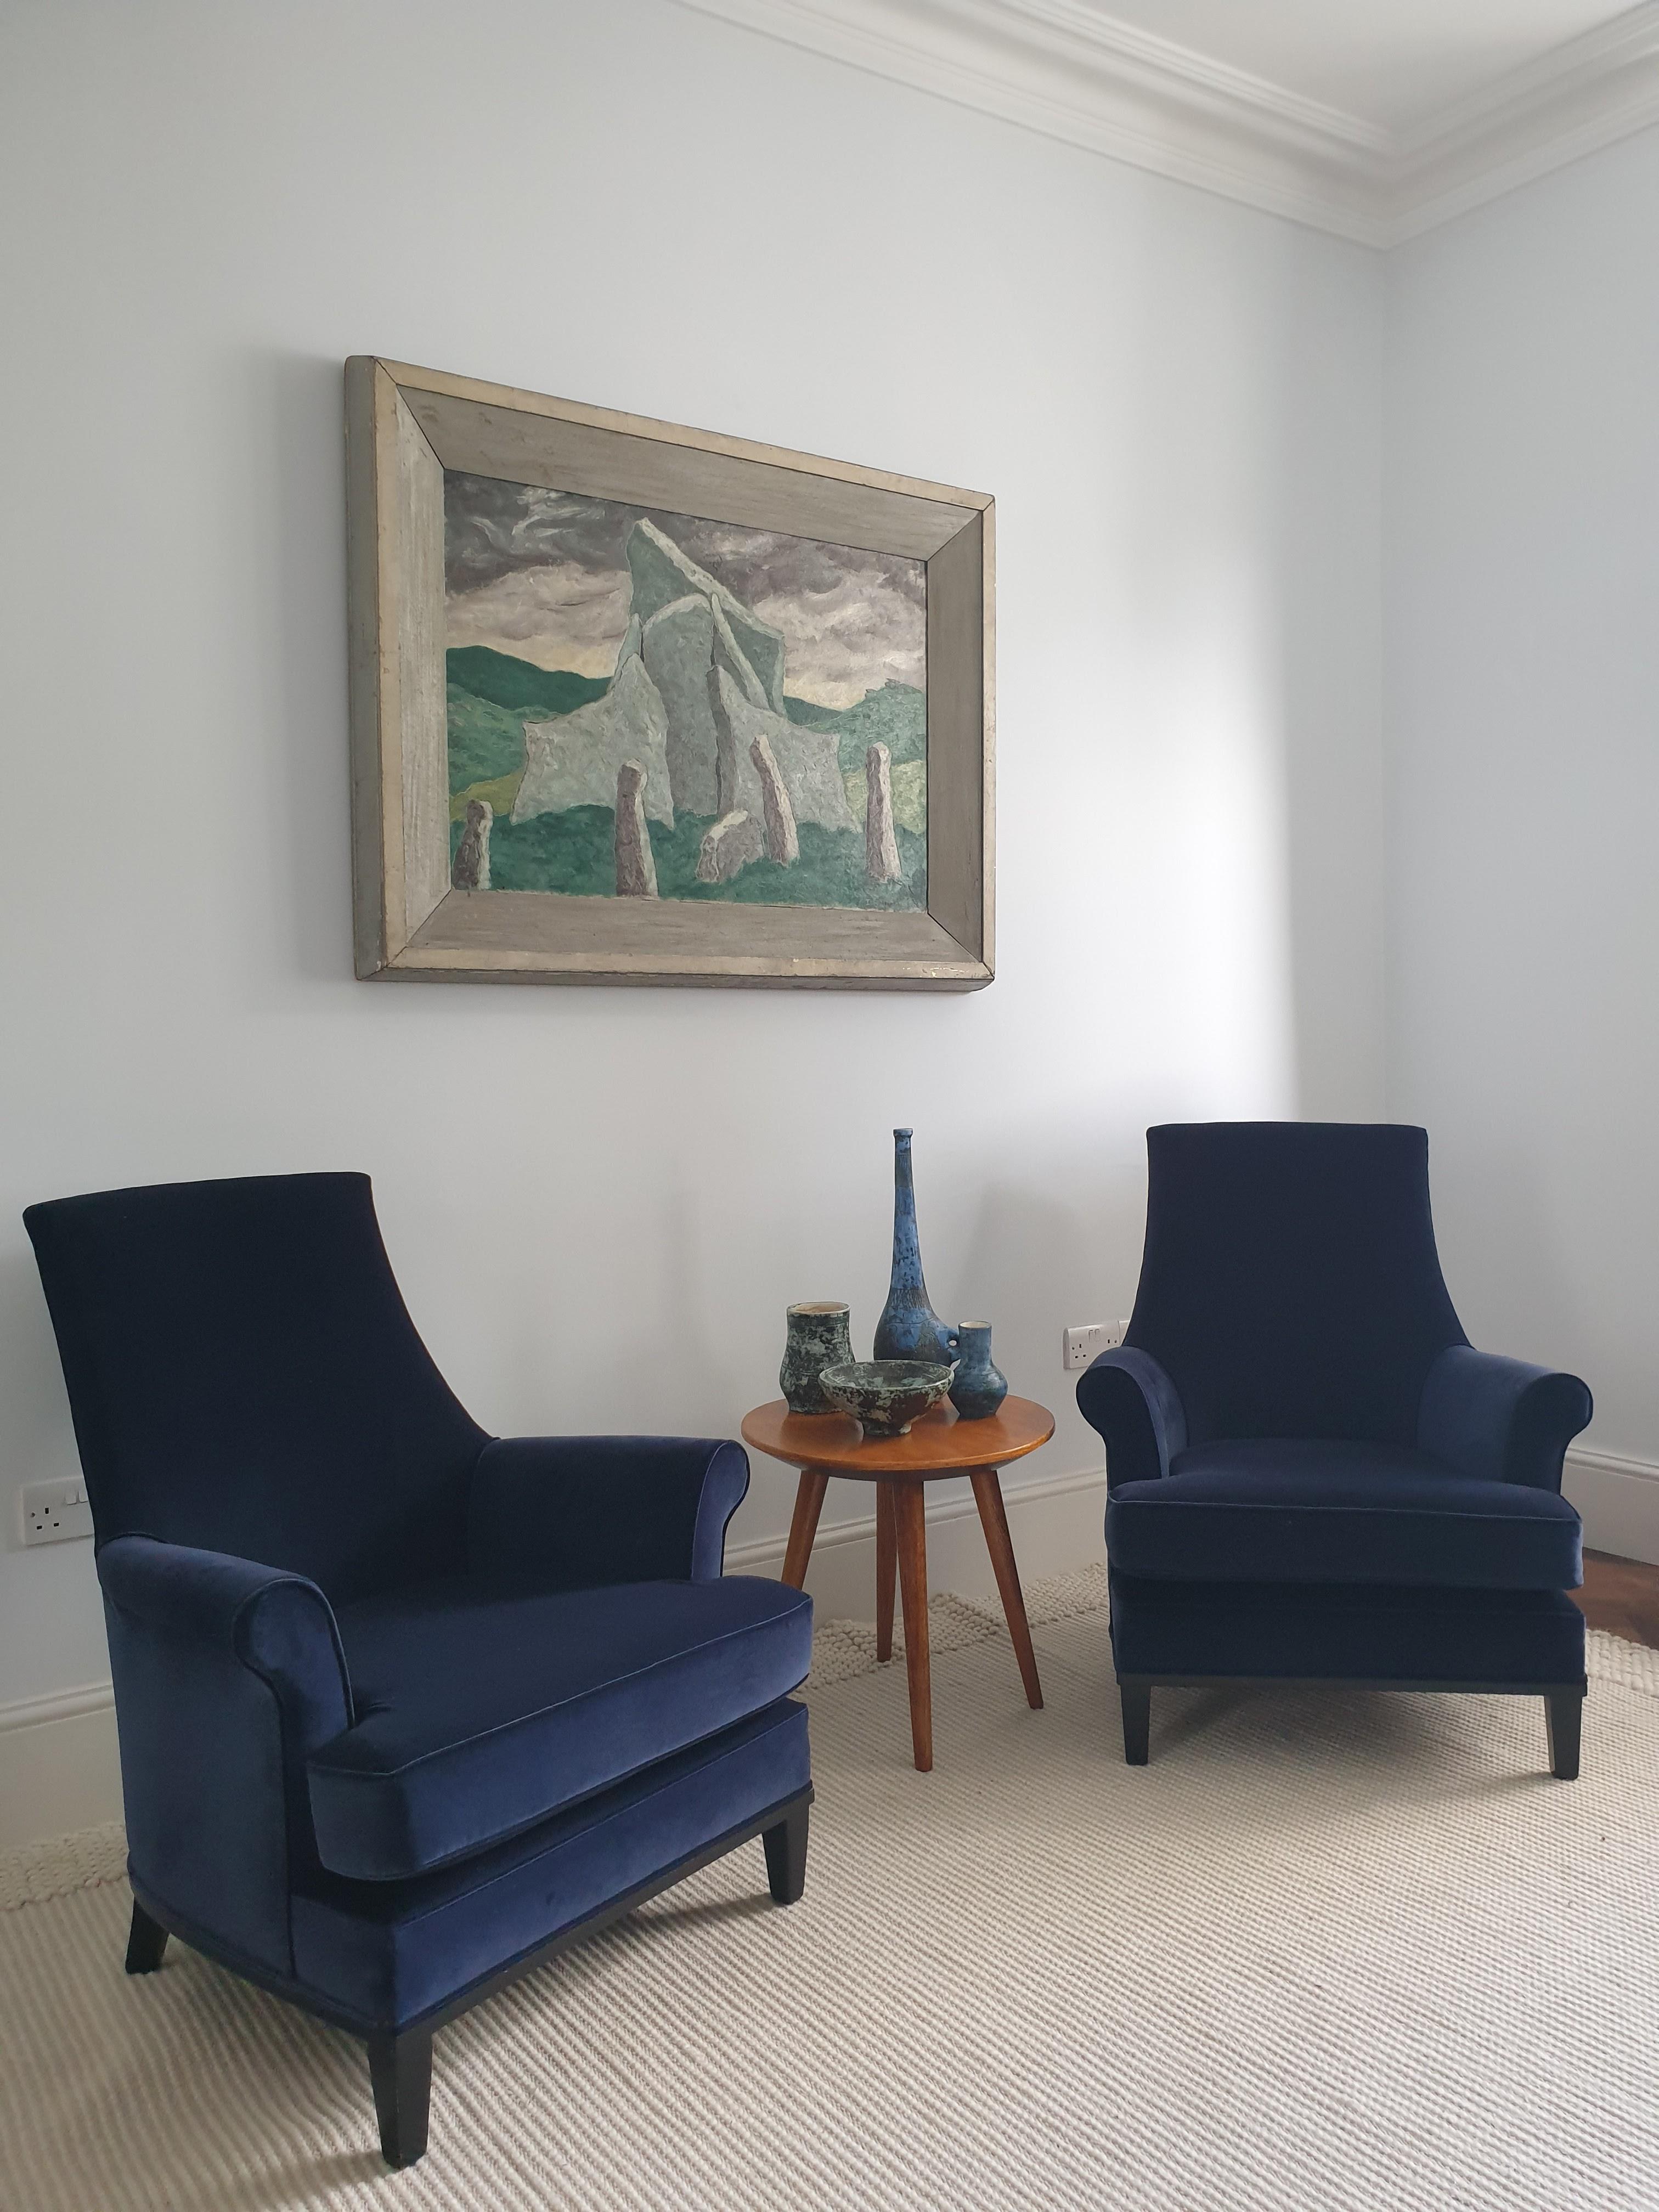 Pair of Mid-Century Modern upholstered armchairs with black lacquered legs and frame, reupholstered in good quality Swedish dark blue velvet. These very comfortable and elegant chairs have an attractive scrolled arm detail. They would fit perfectly